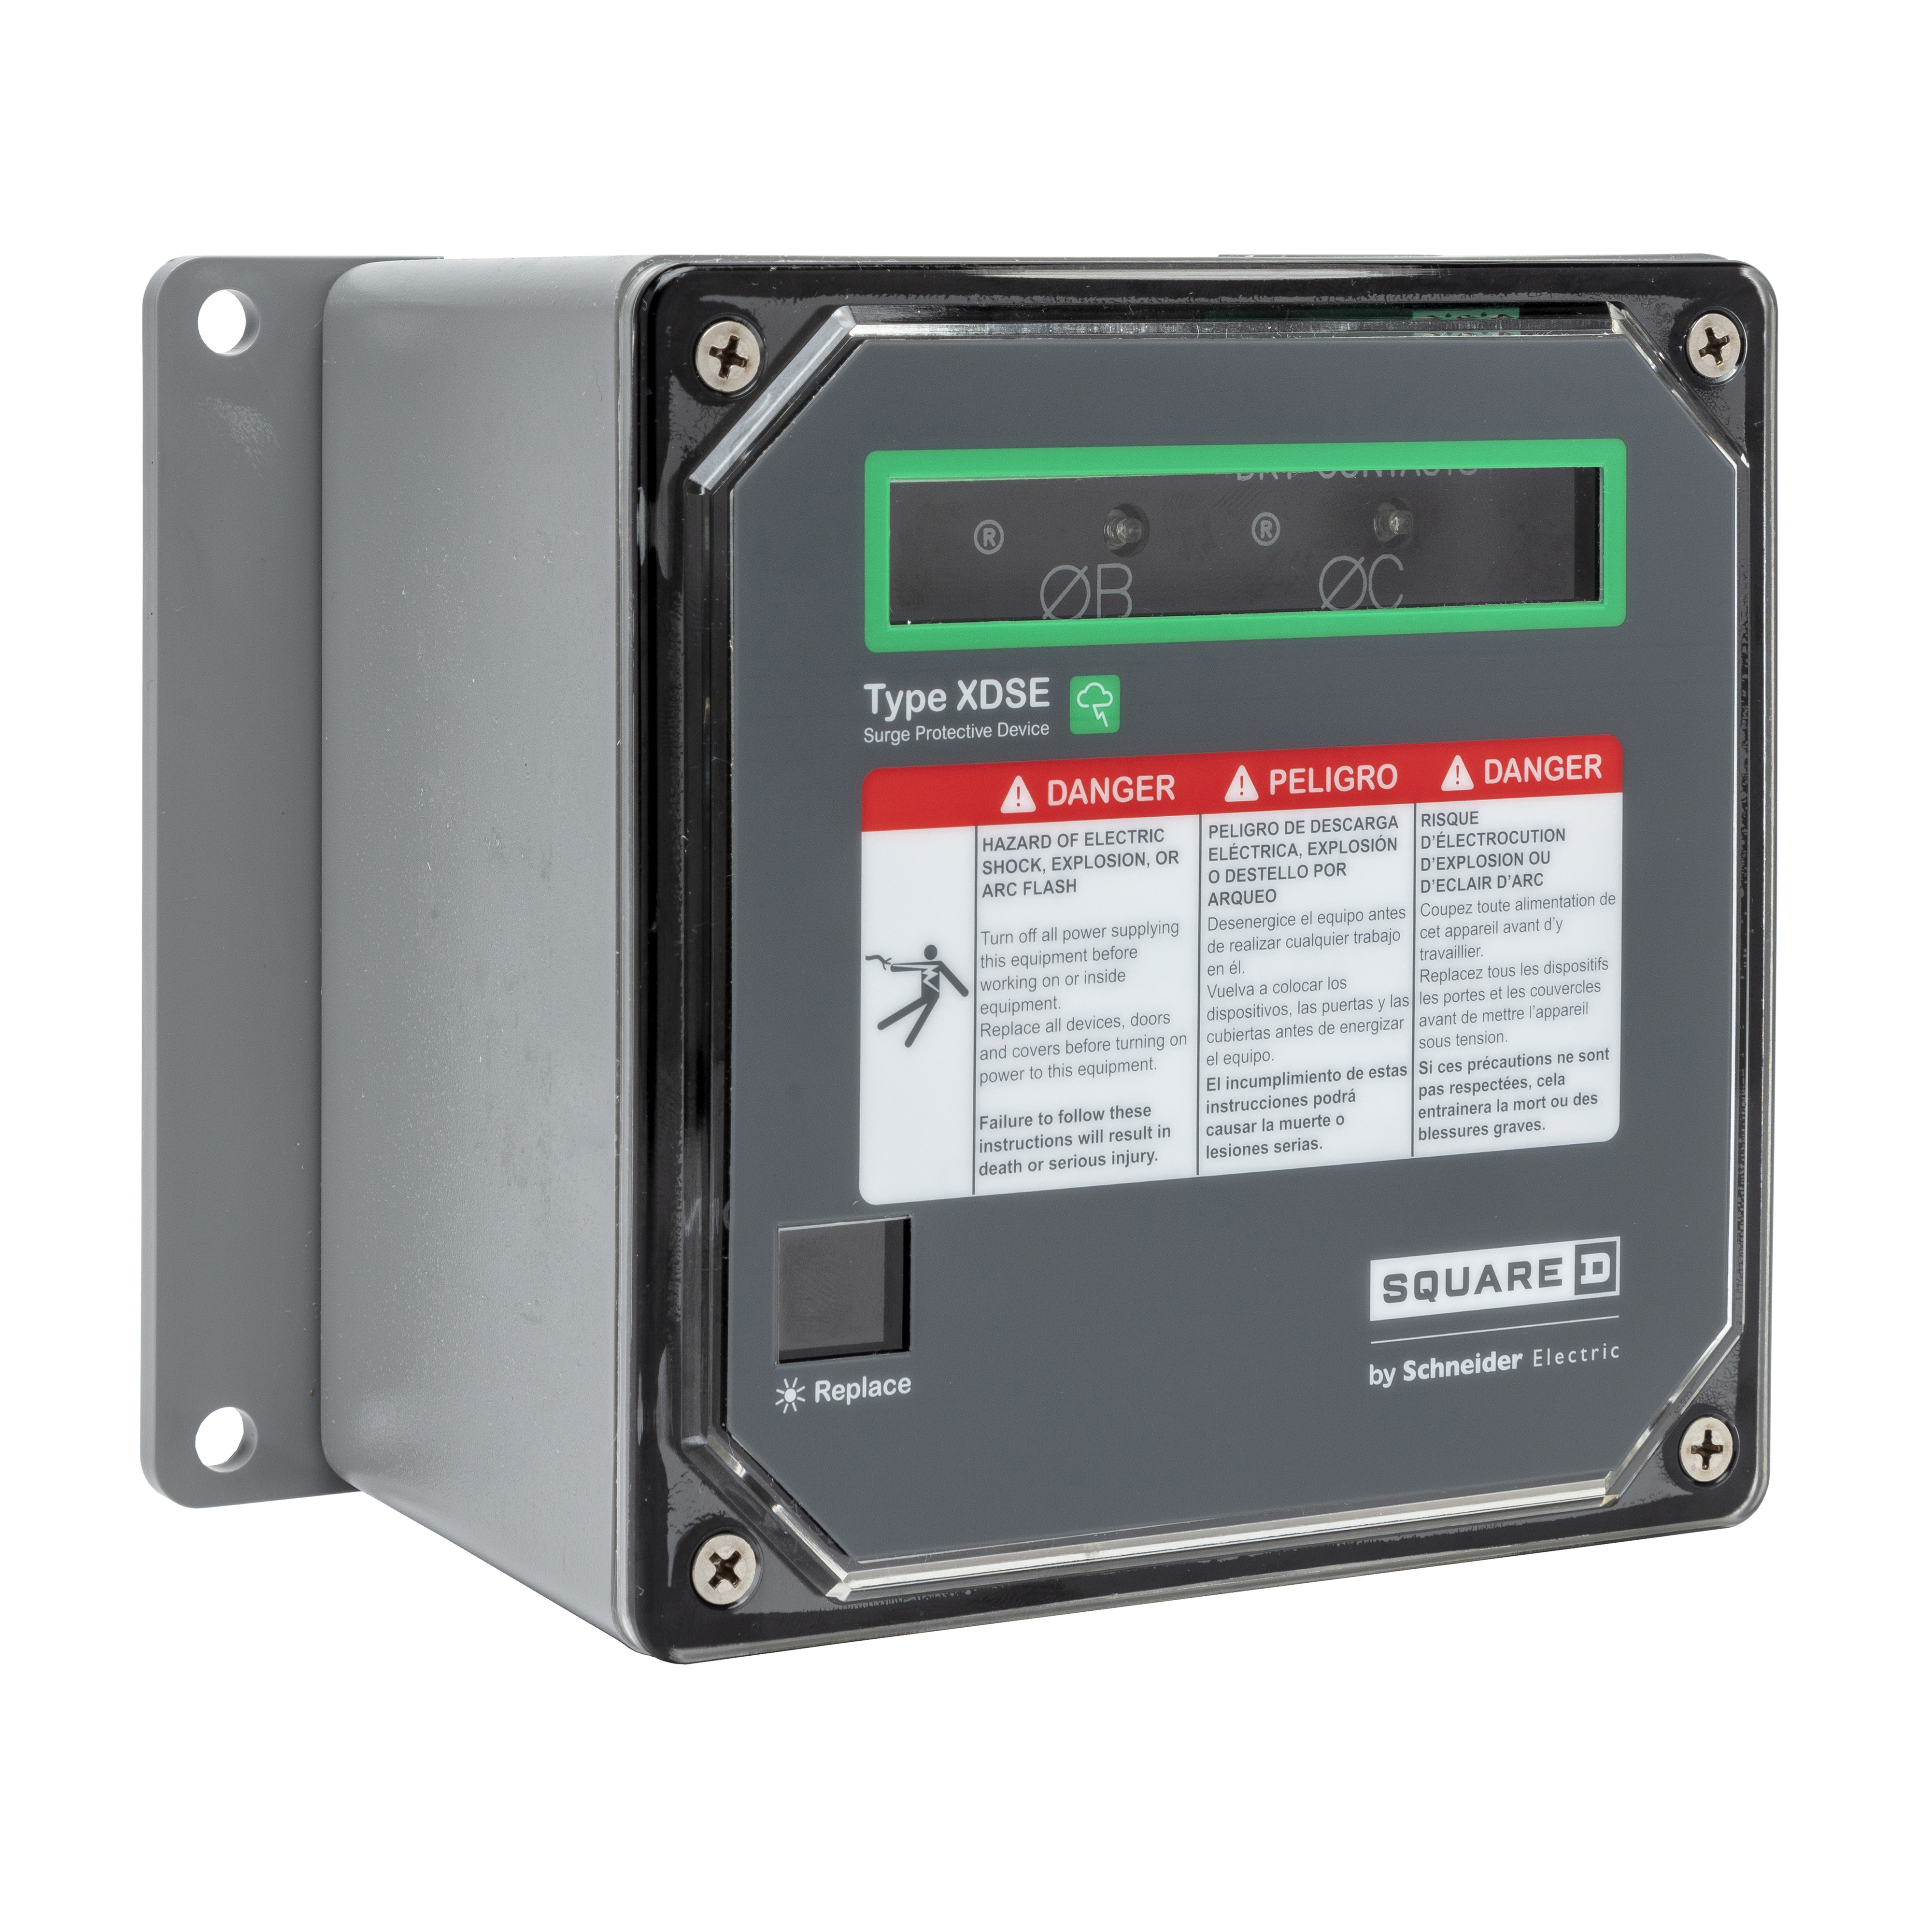 Surge protection device, XDSE, 150kA, 480Y/277 VAC, 3 phase, 4 wire, SPD type 2